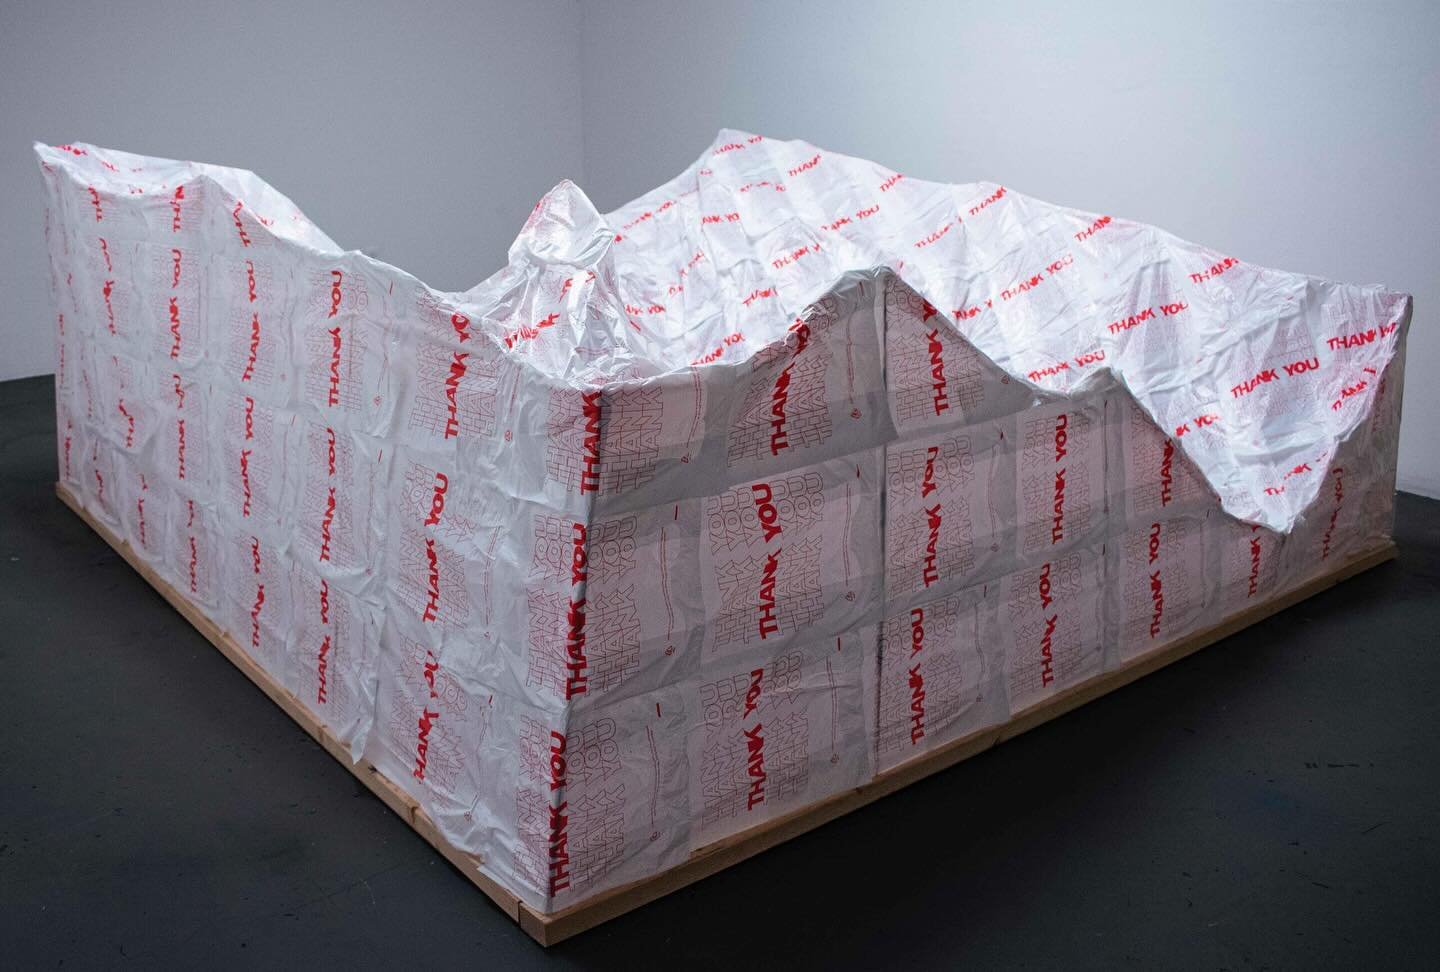 &lsquo;God Bless America&rsquo; is an installation artwork replicating an undisclosed American landscape with to-go plastic bags by CA-based artist, Chase Young (@chasetylery0ung). Young&rsquo;s work utilizes sound objects and imagery to reference ou